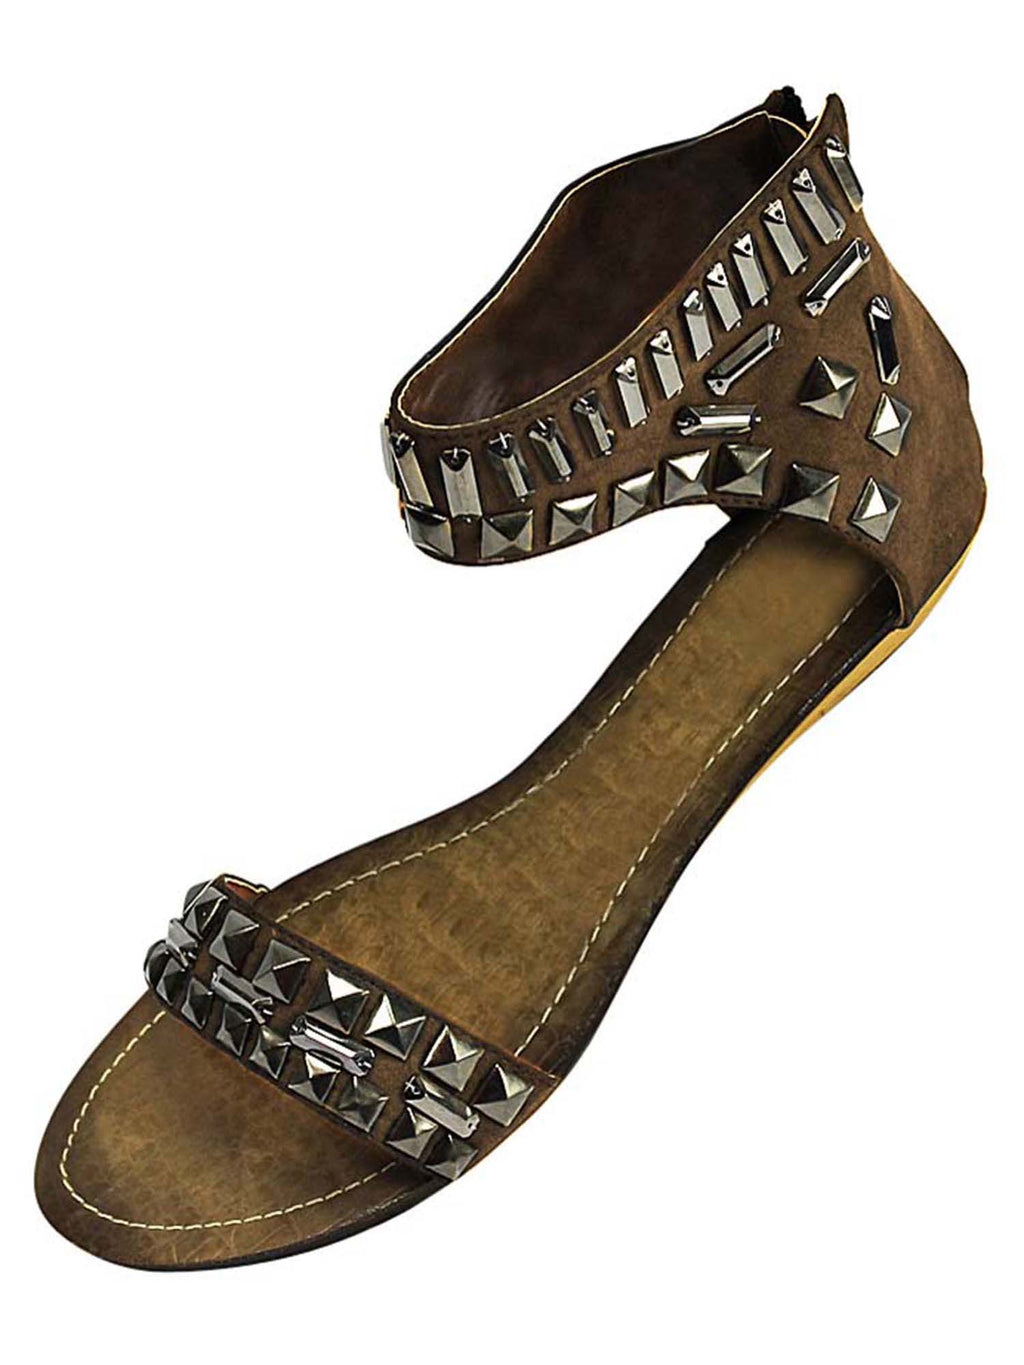 Studded Ankle Strap Flat Womens Sandals